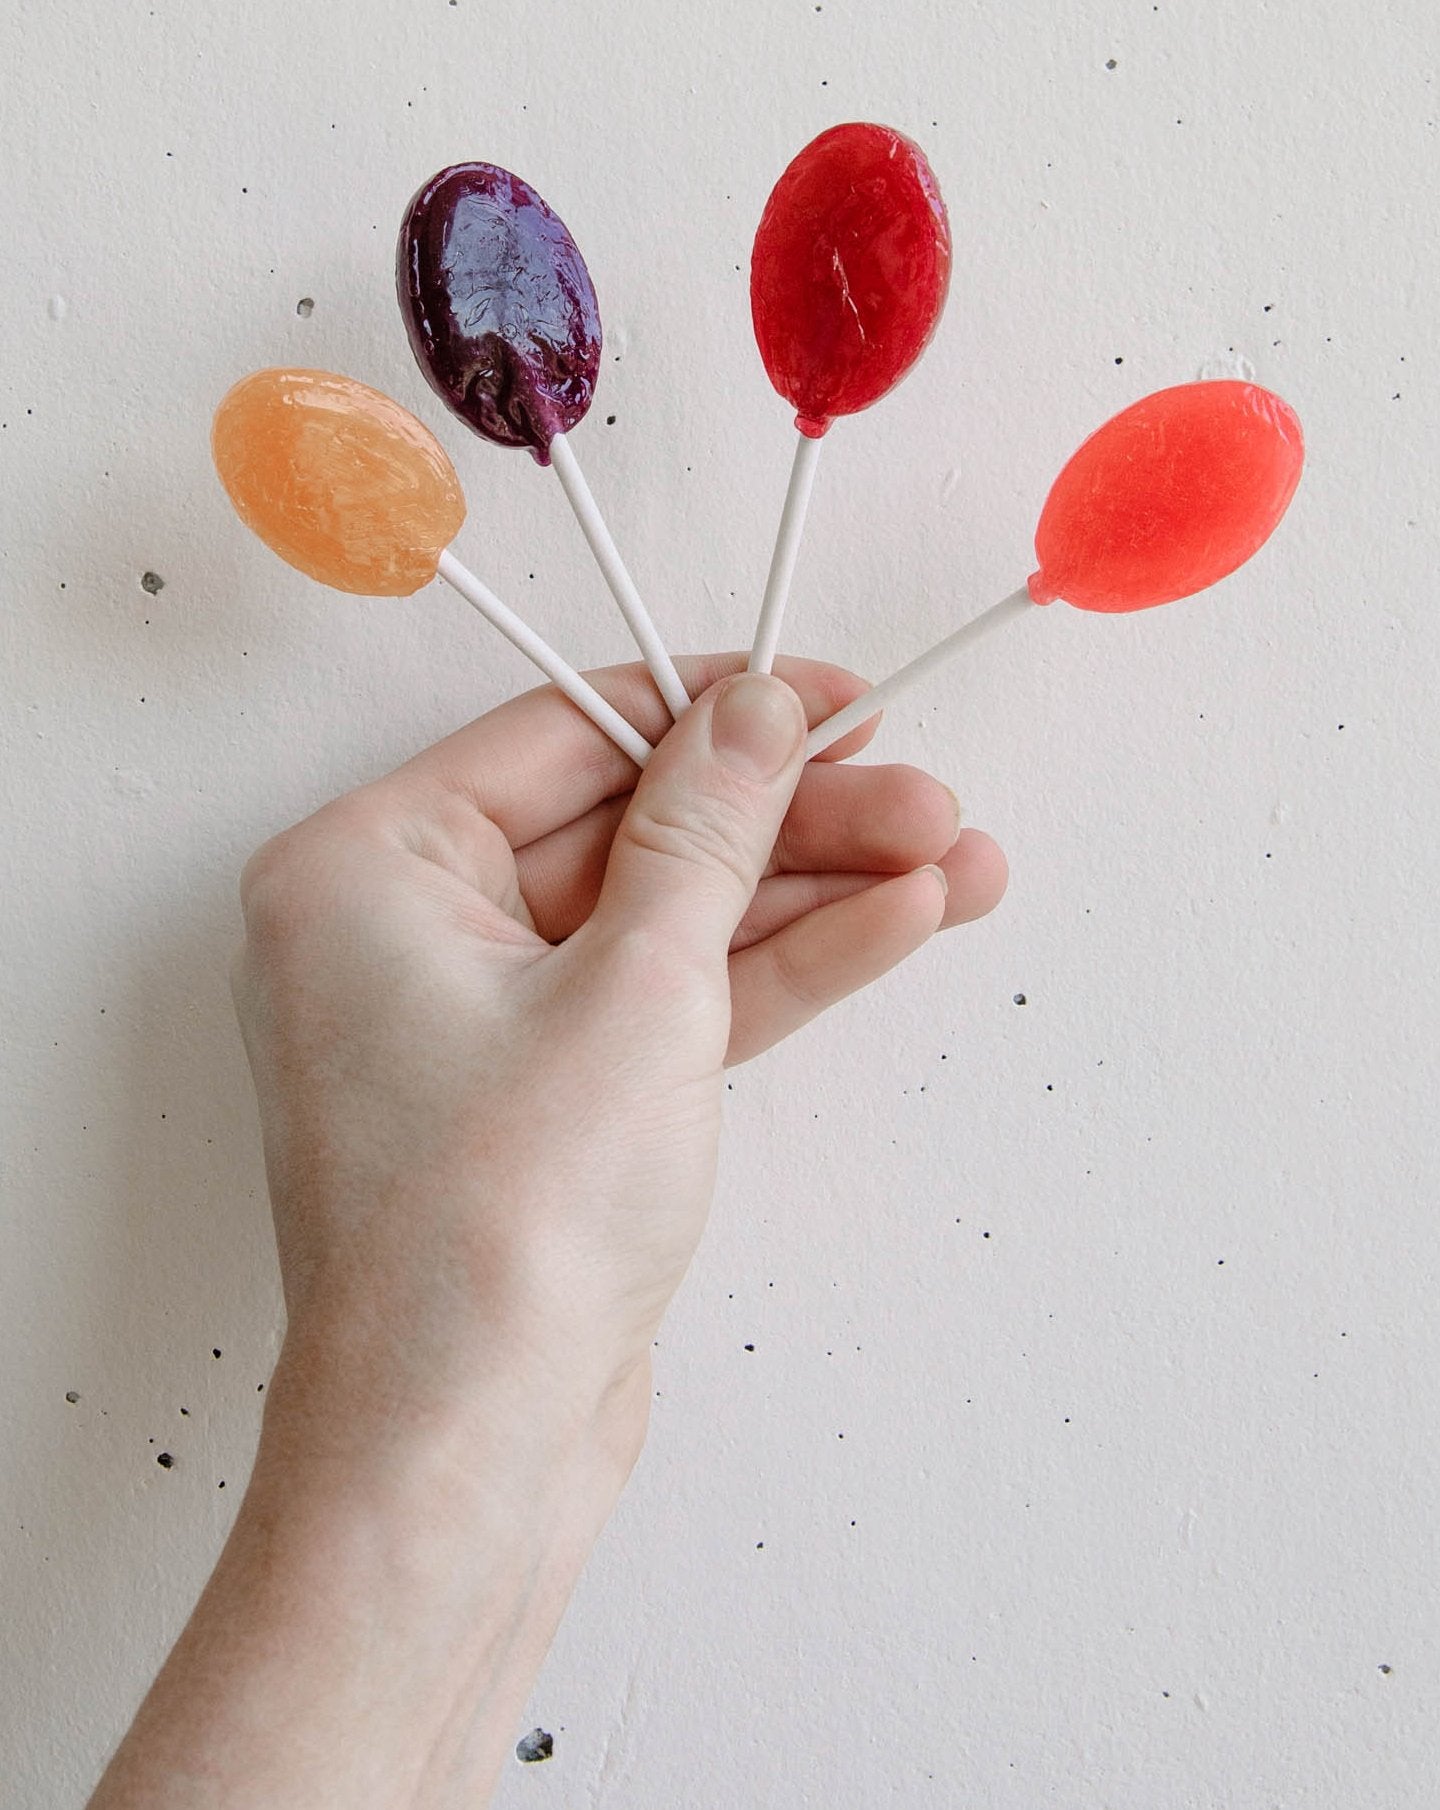 Control Cravings Between Meals with Flat Tummy Lollipops